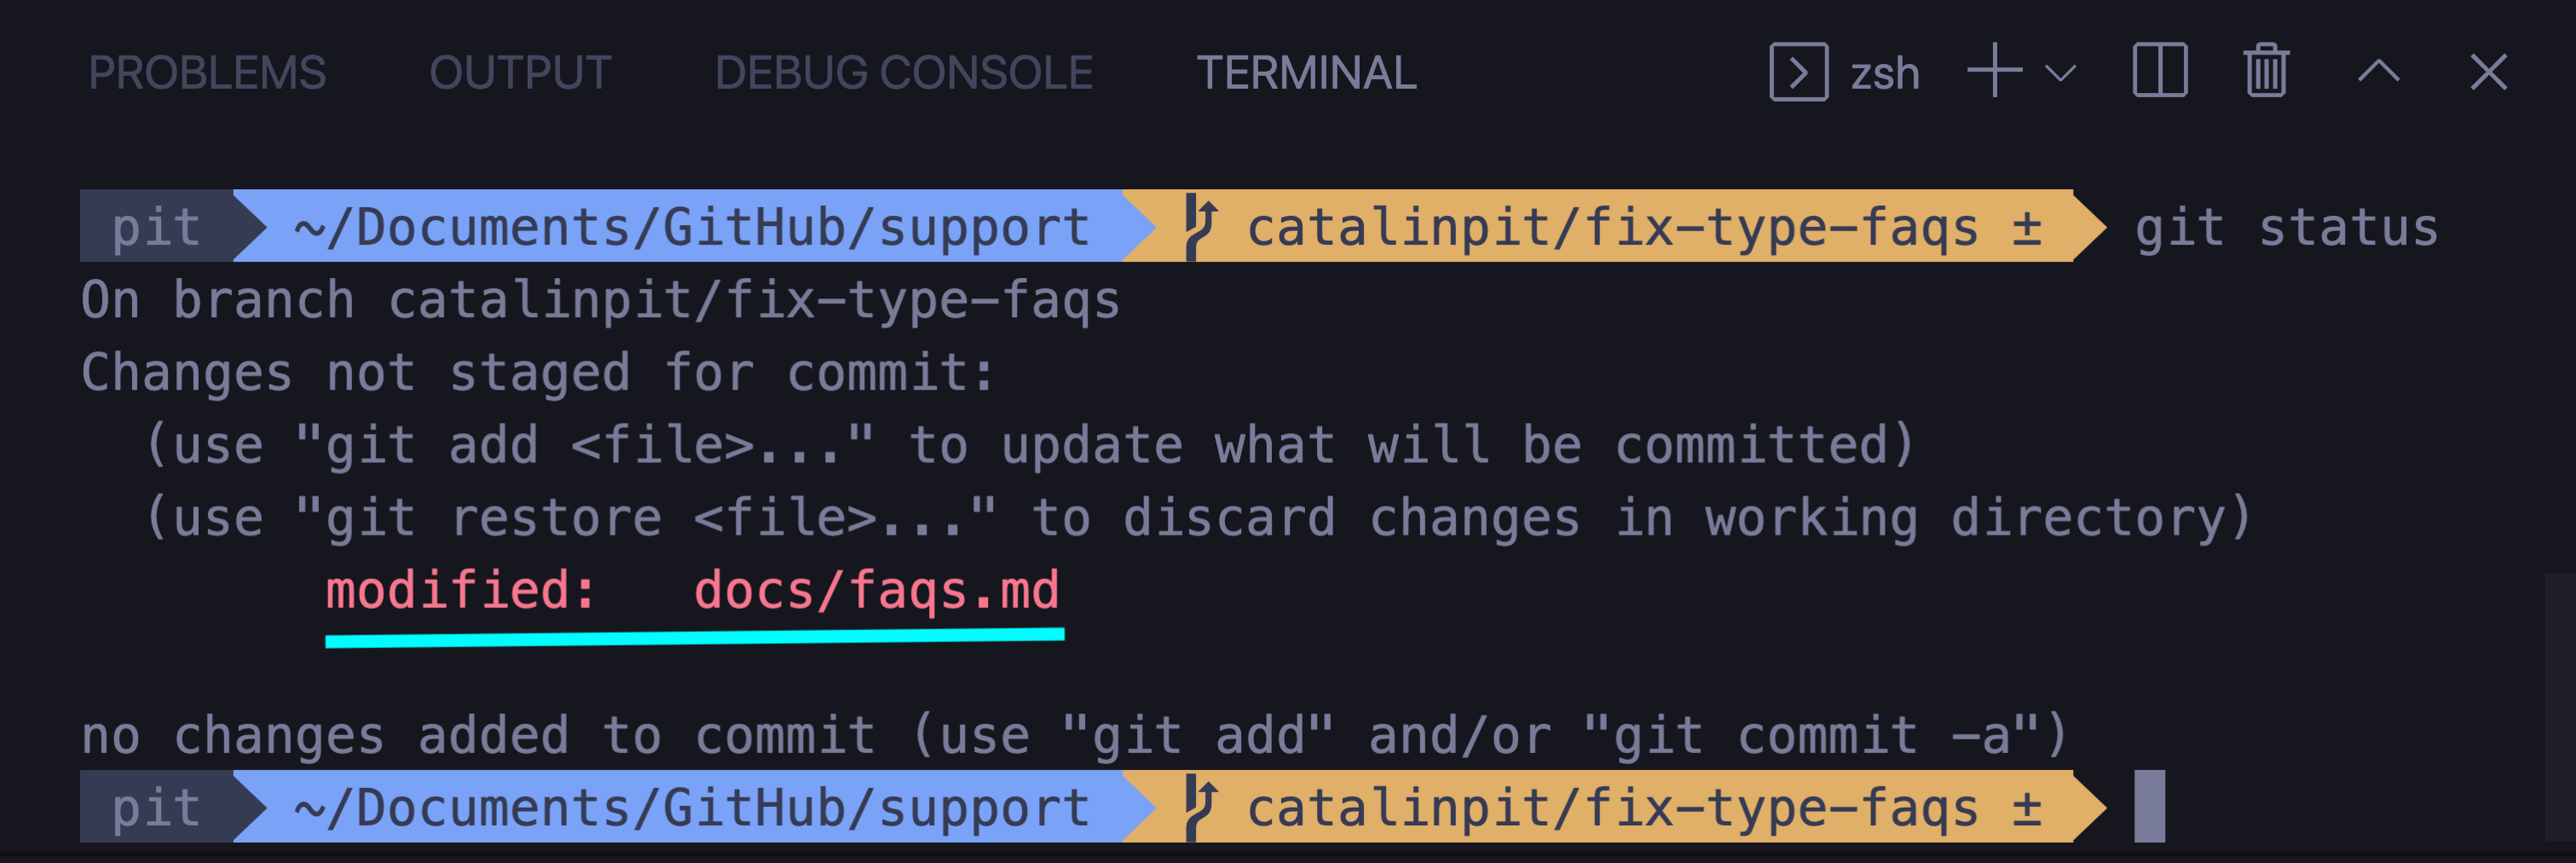 Git status output from the terminal